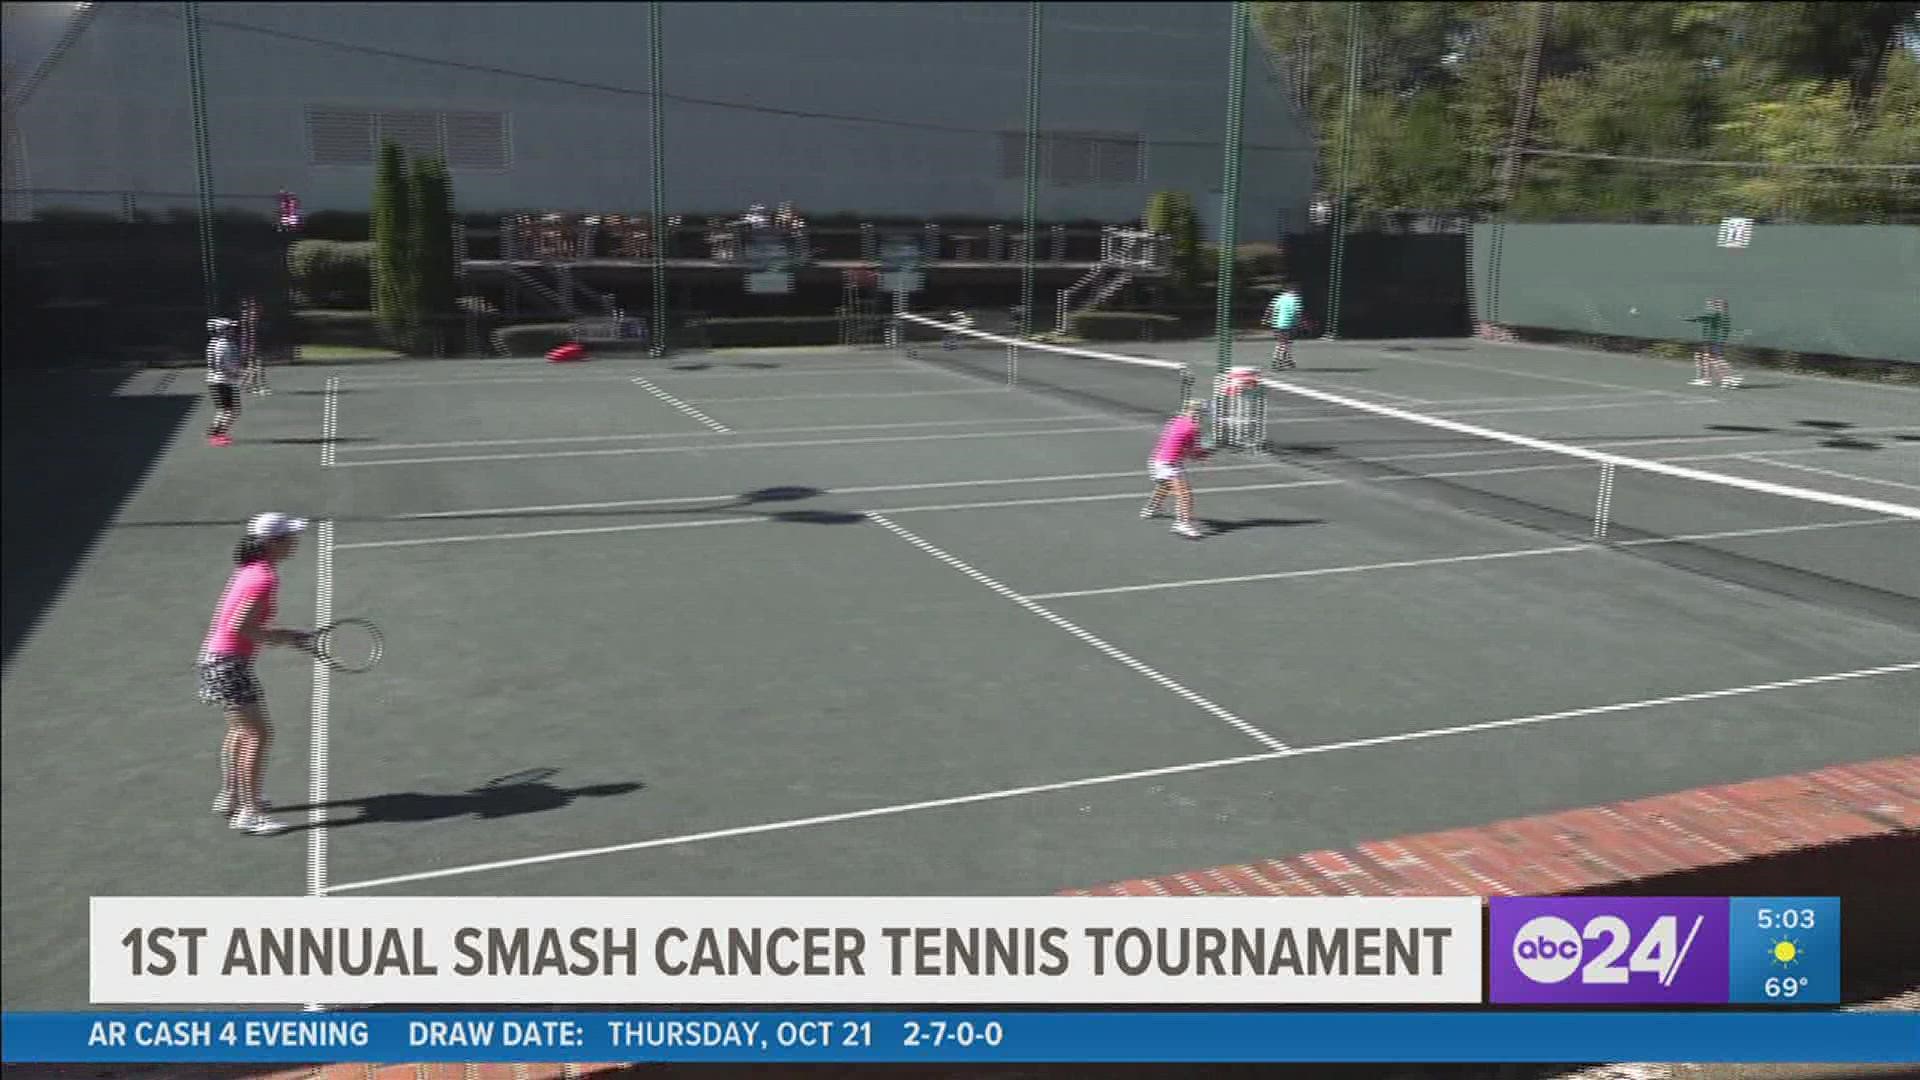 They competed Friday in the very first annual Smash Cancer Tennis Tournament at the University Club of Memphis.